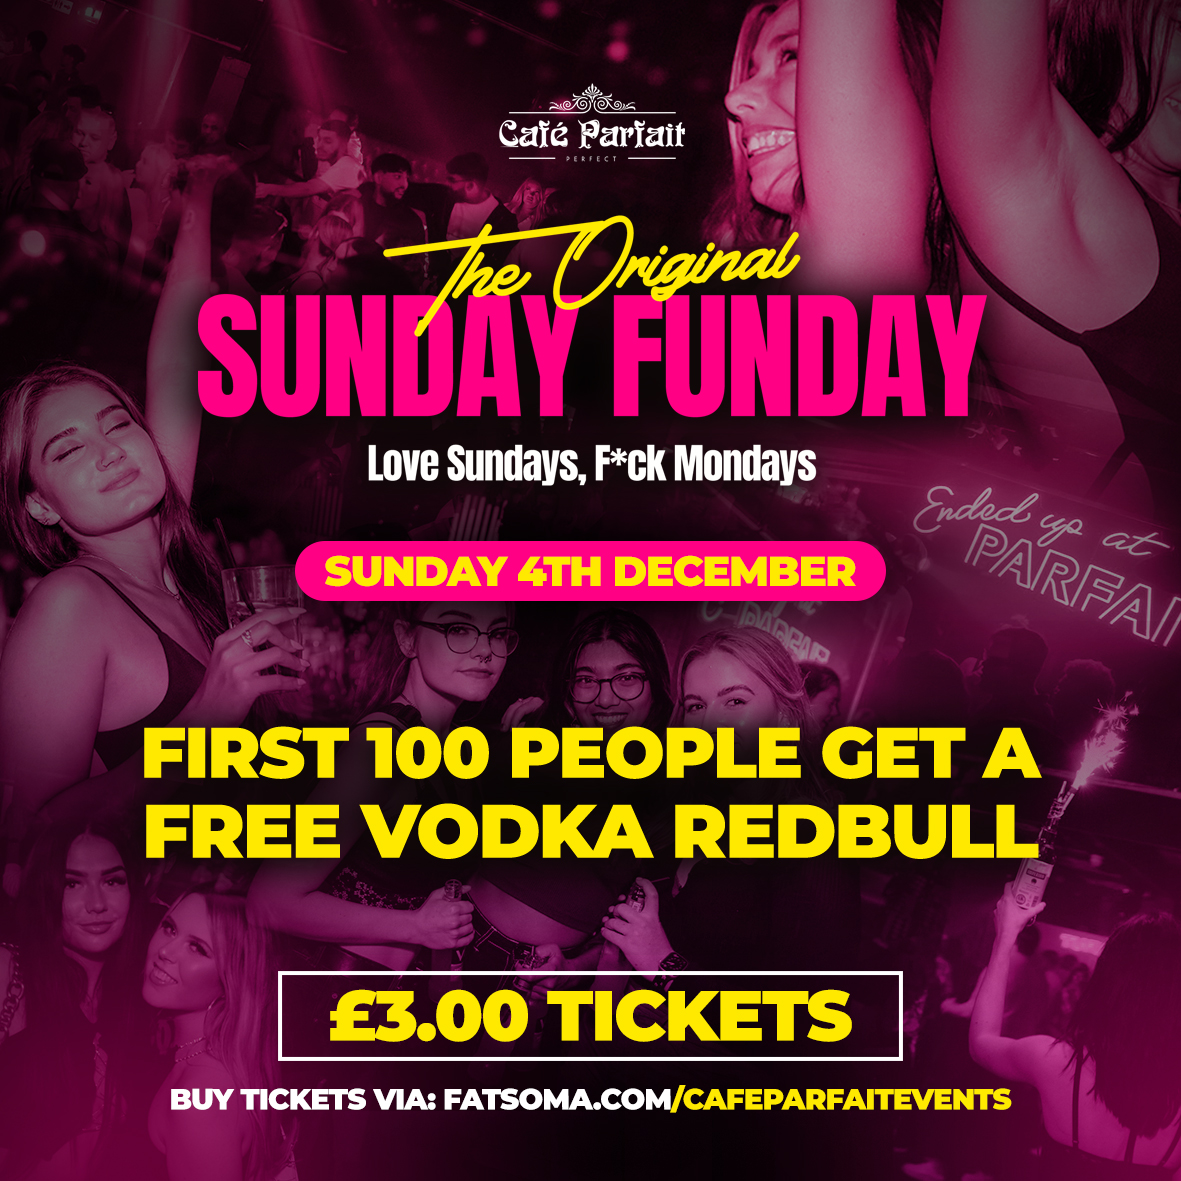 FIRST 100 PEOPLE GET A FREE VODKA REDBULL//Sunday Funday- Multi Venue Party @Cafe Parfait x Tokyo